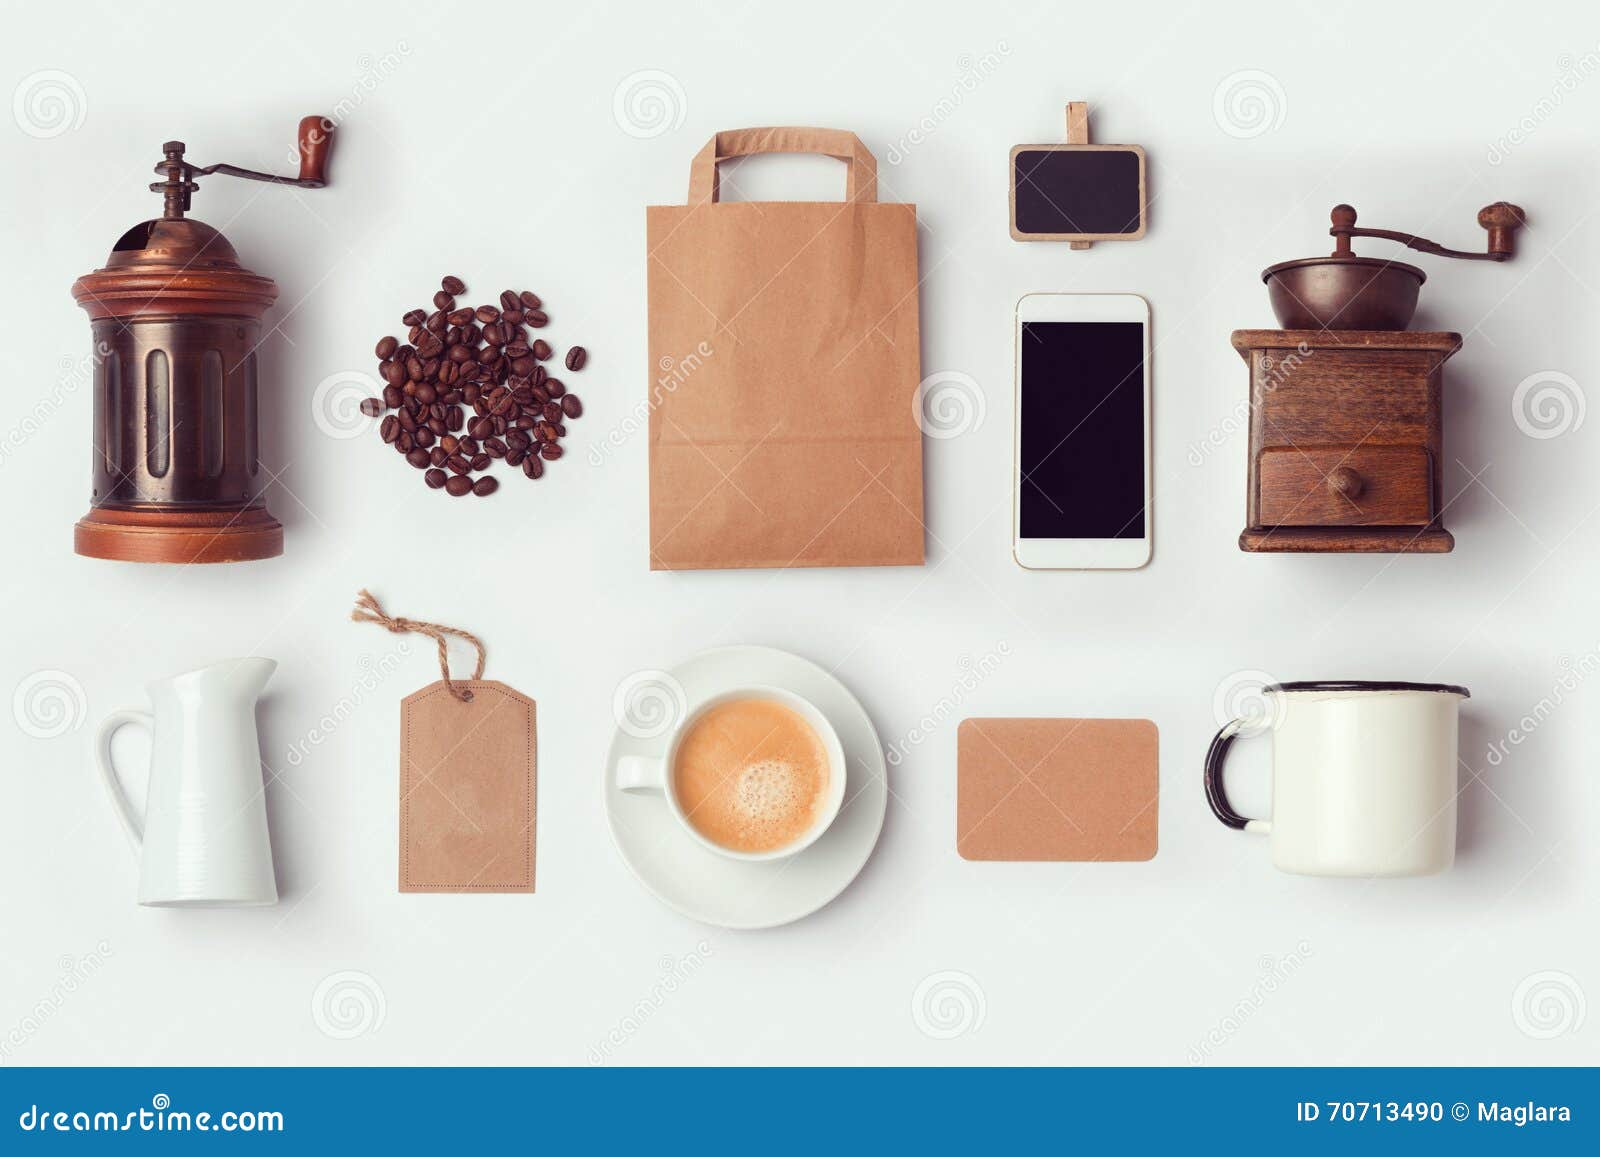 Coffee Shop Mock Up Template for Branding Identity Design. Flat Lay